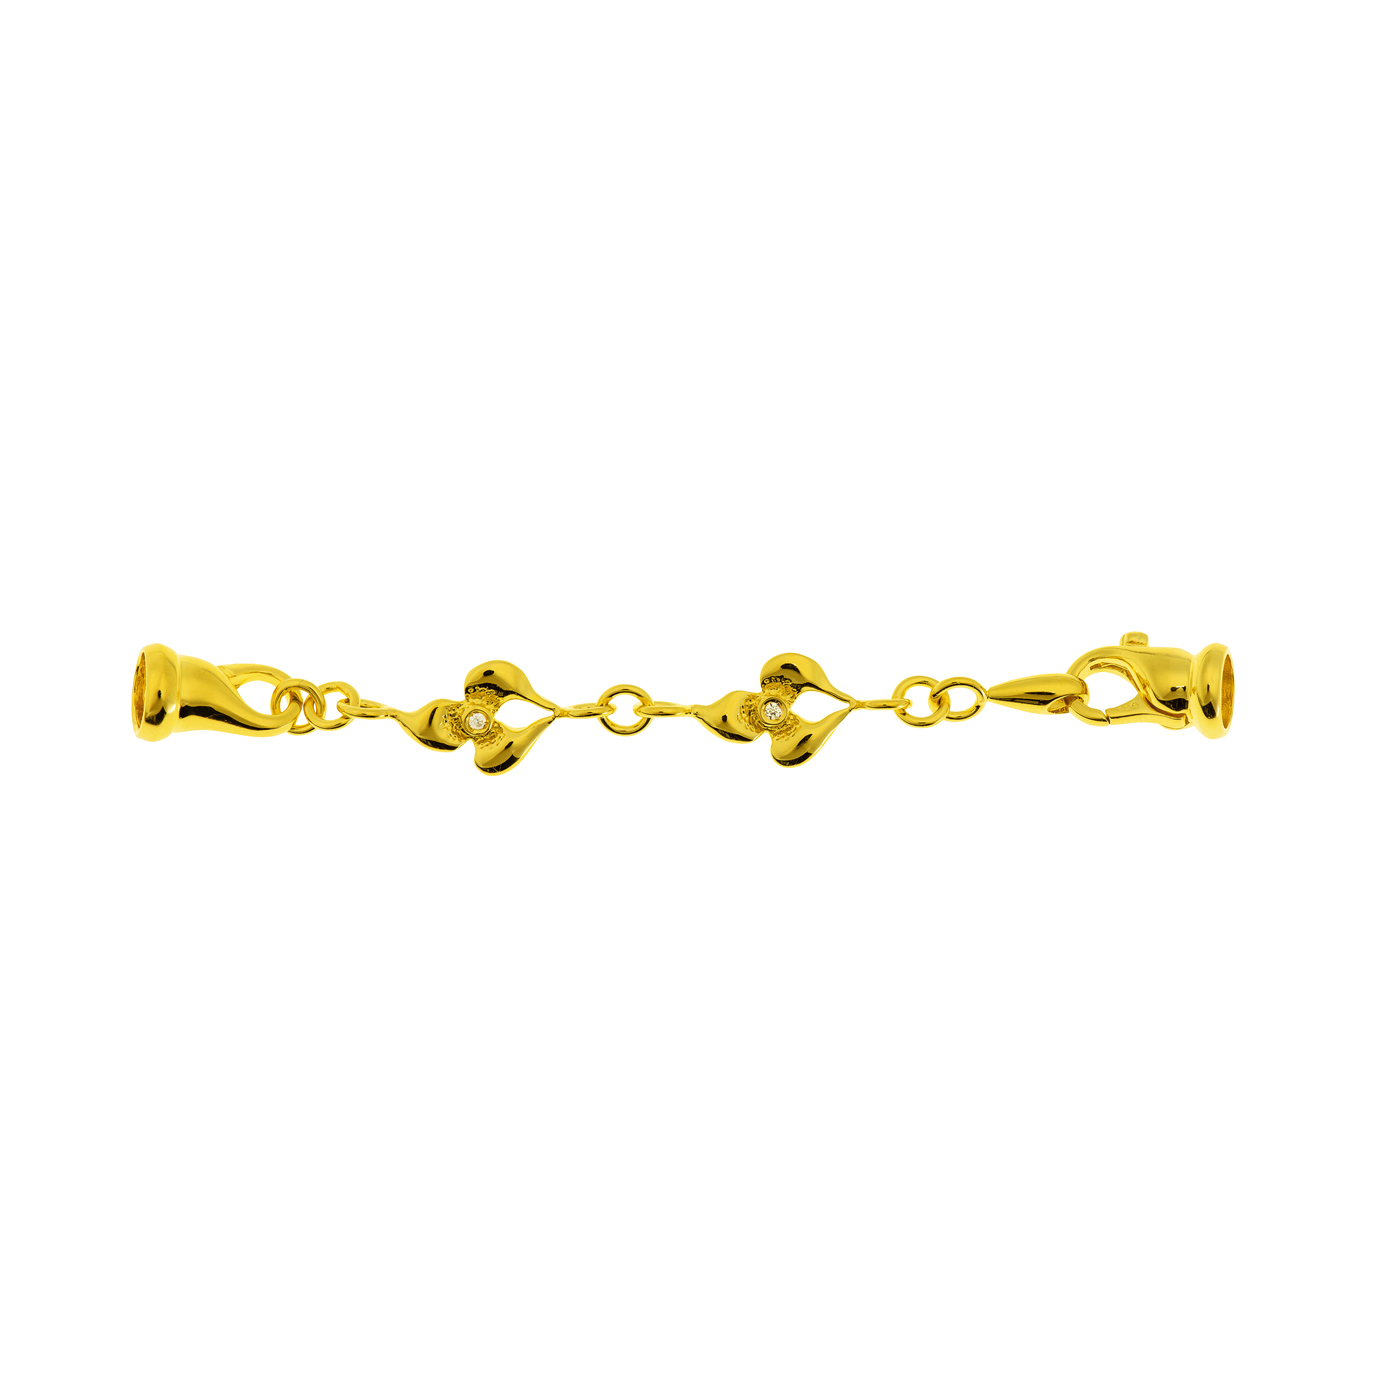 Elongation Chain, 925Ag Gold-Plated, 77 mm, Floral - 1 piece